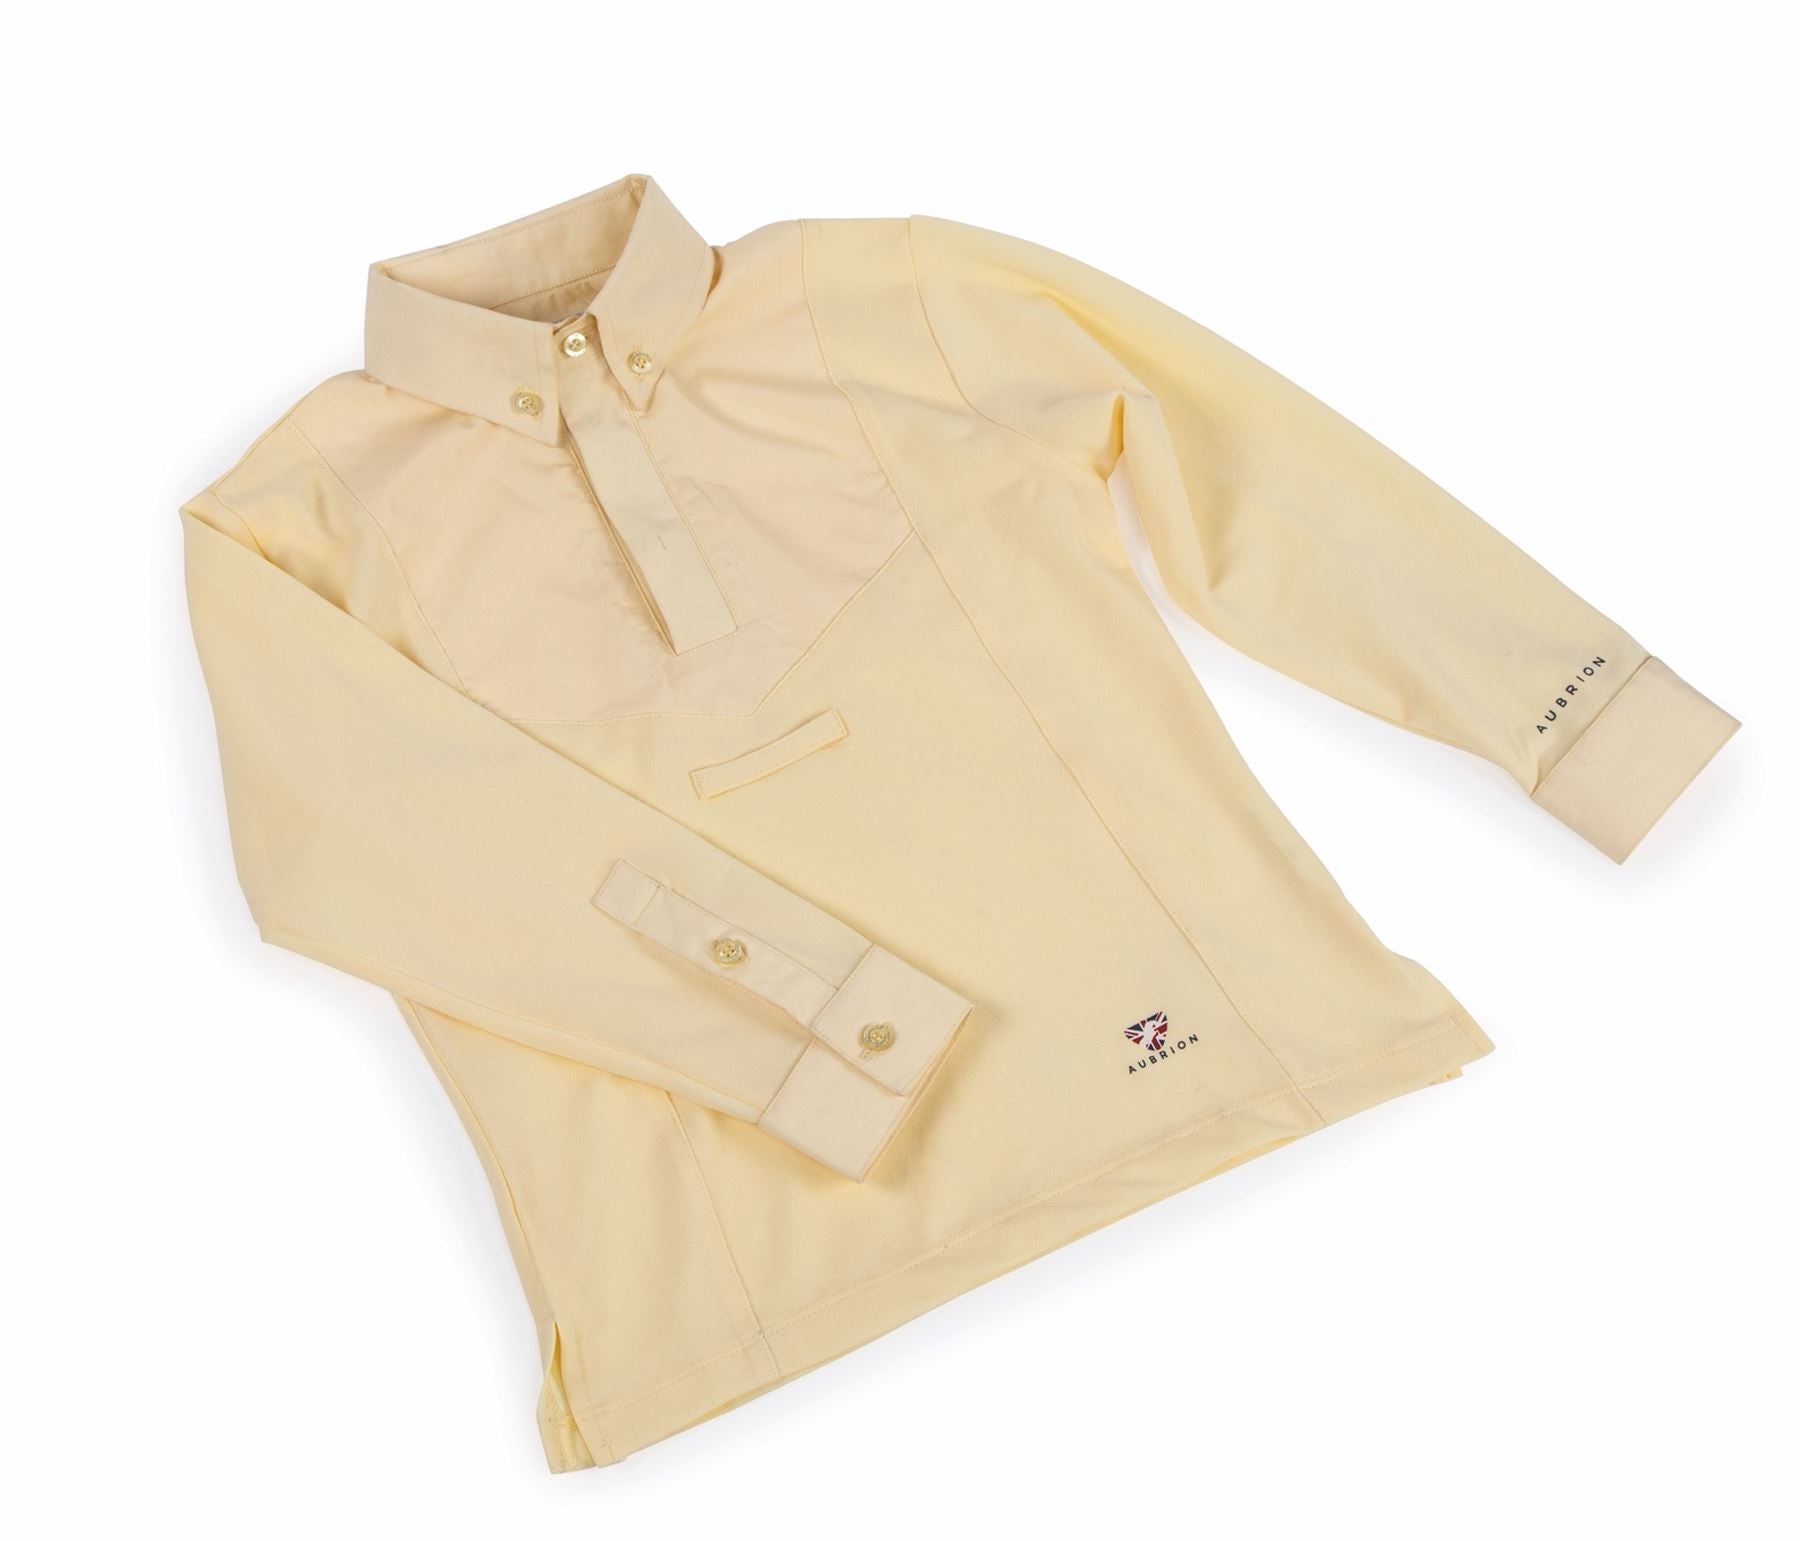 Shires Aubrion Long Sleeve Tie Shirt - Child - Just Horse Riders